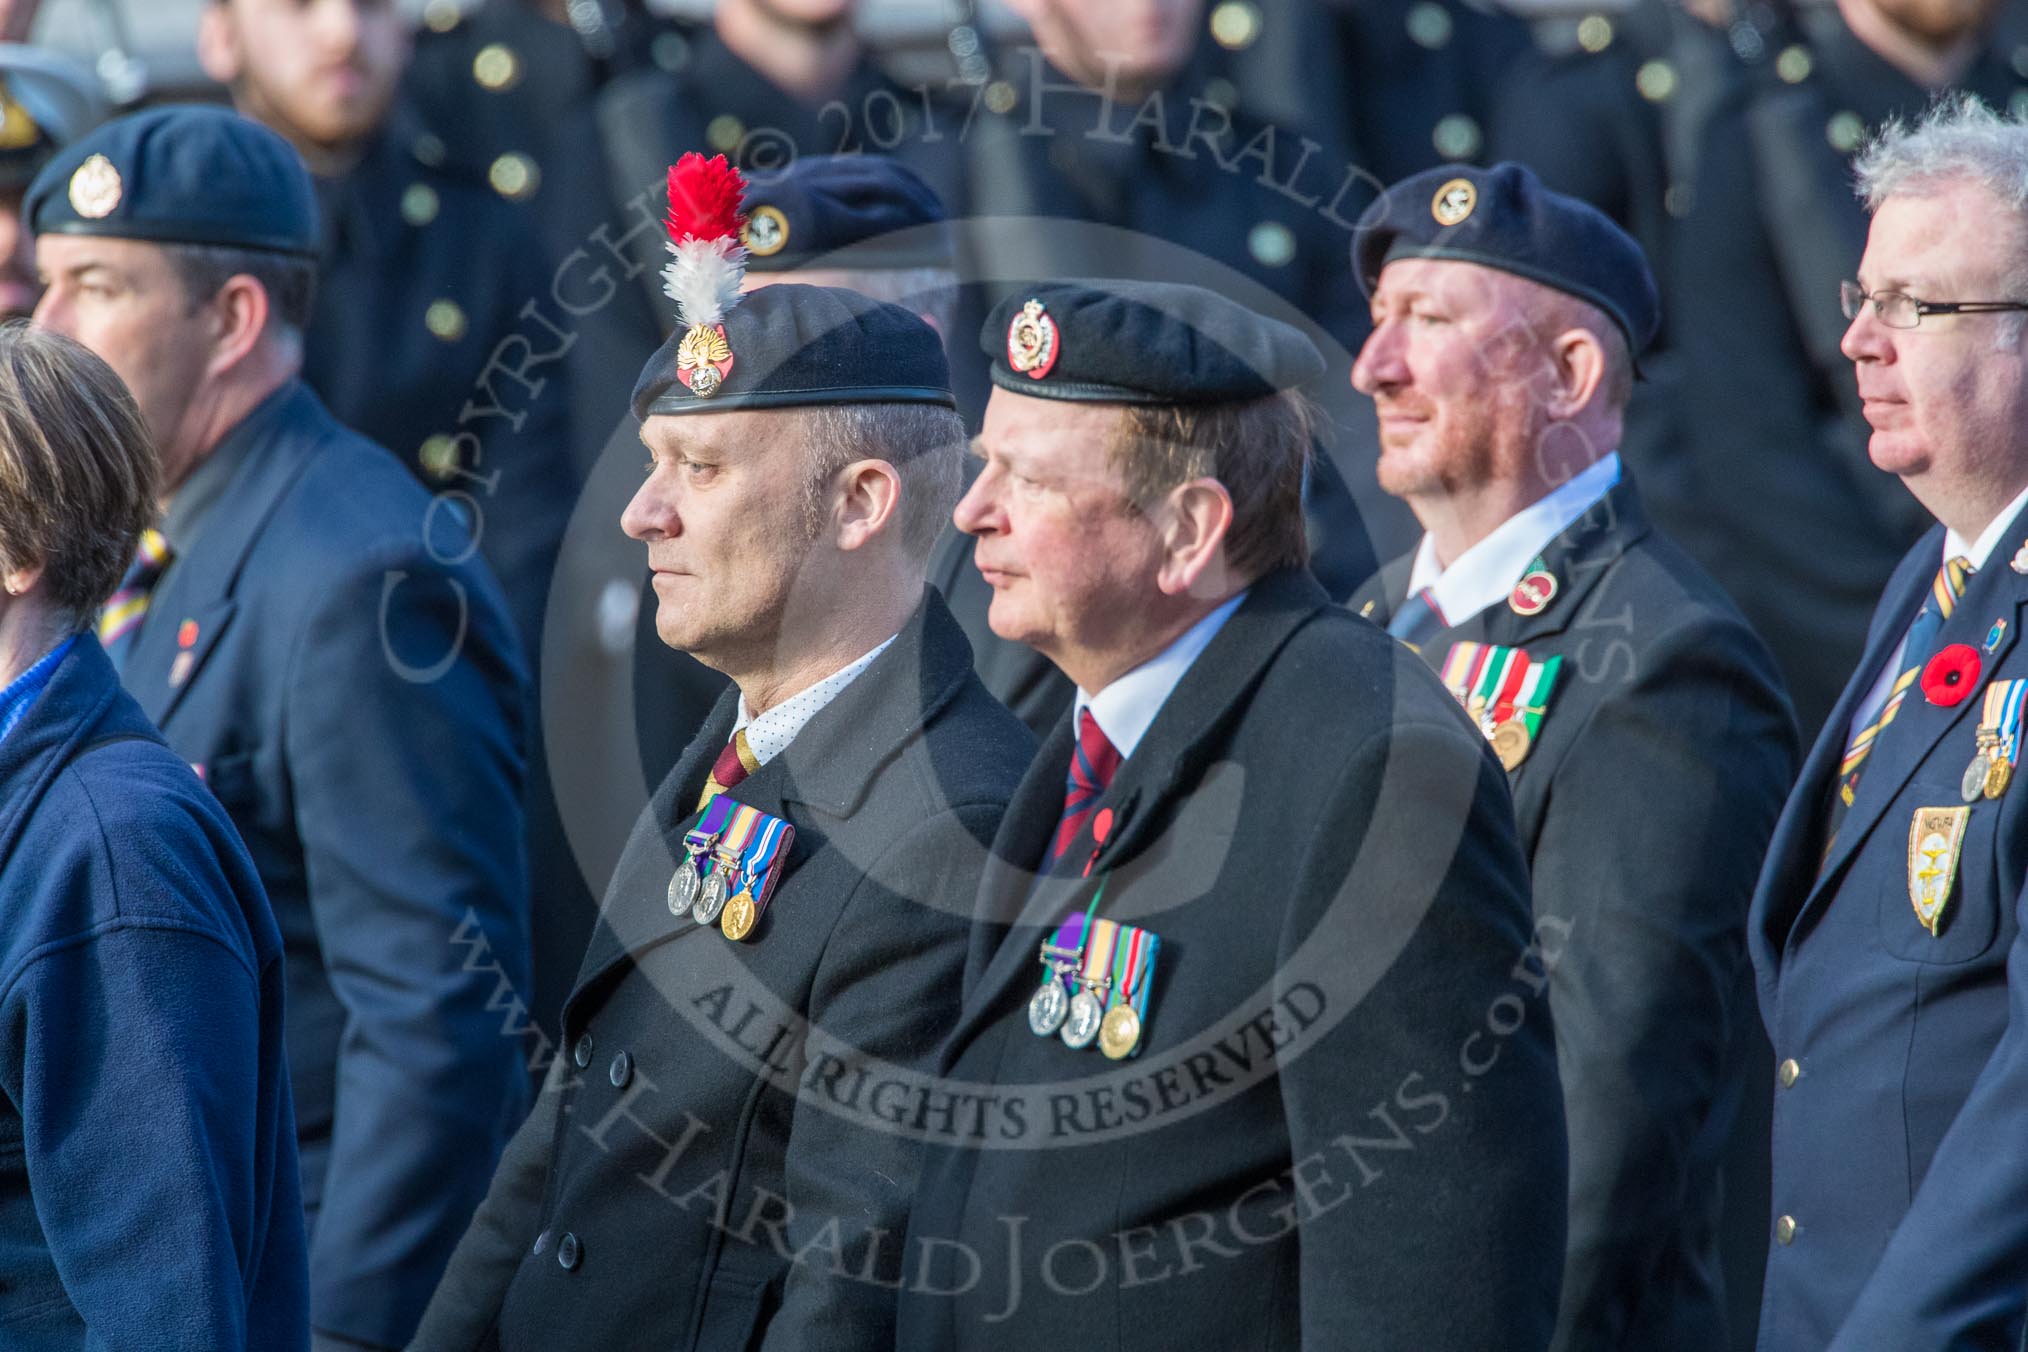 National Gulf Veterans and Families Association (Group F14, 25 members) during the Royal British Legion March Past on Remembrance Sunday at the Cenotaph, Whitehall, Westminster, London, 11 November 2018, 11:52.